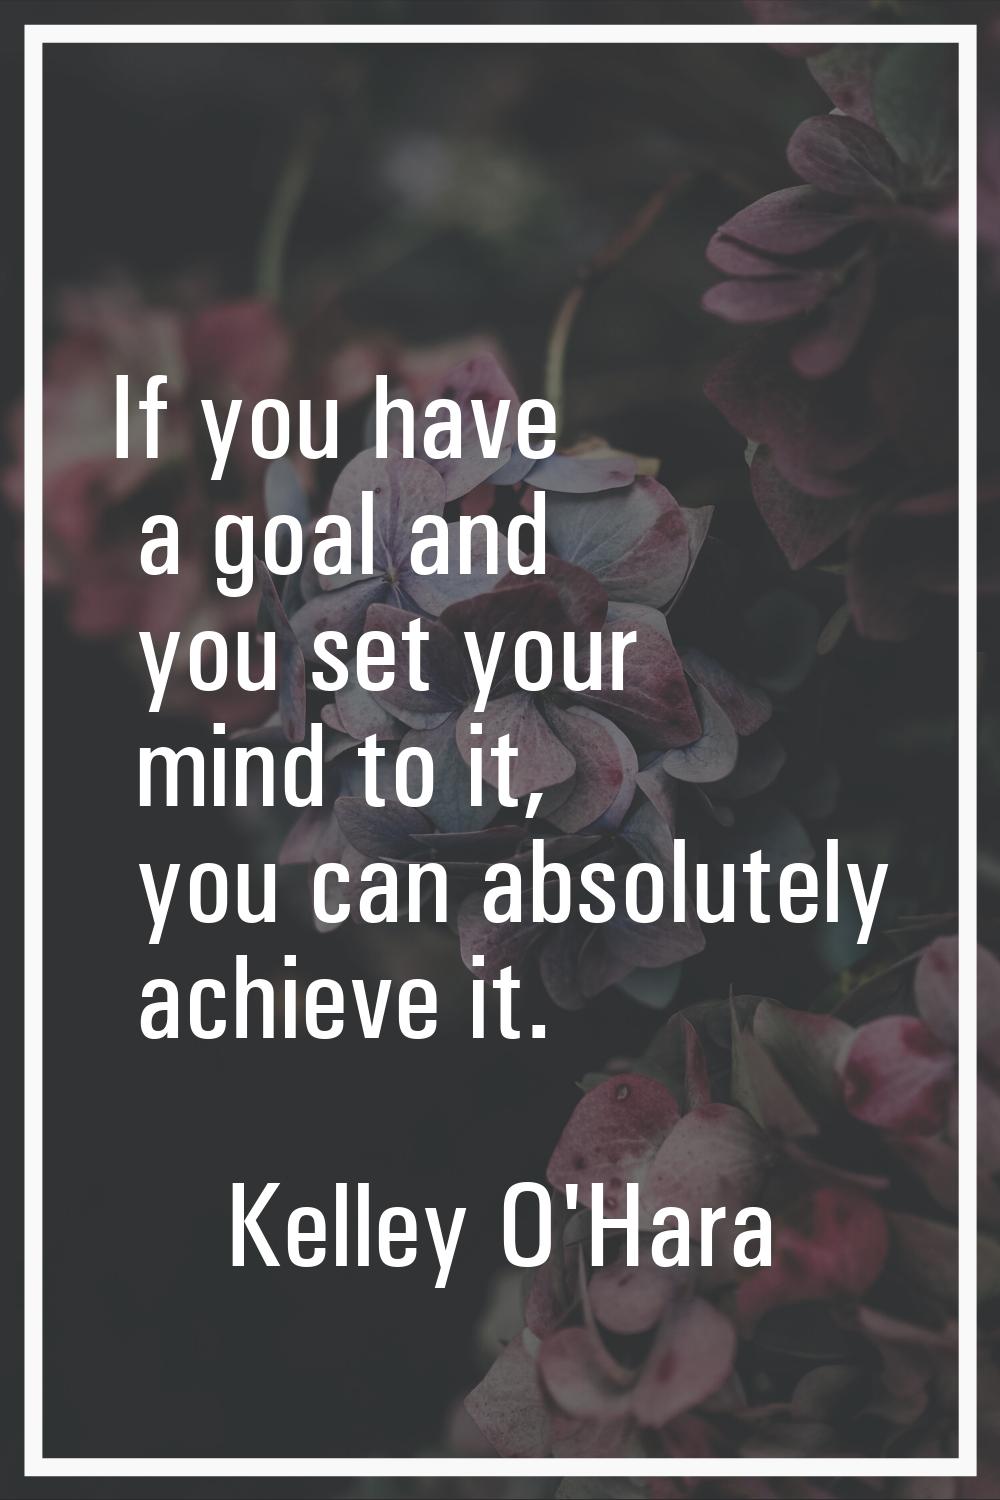 If you have a goal and you set your mind to it, you can absolutely achieve it.